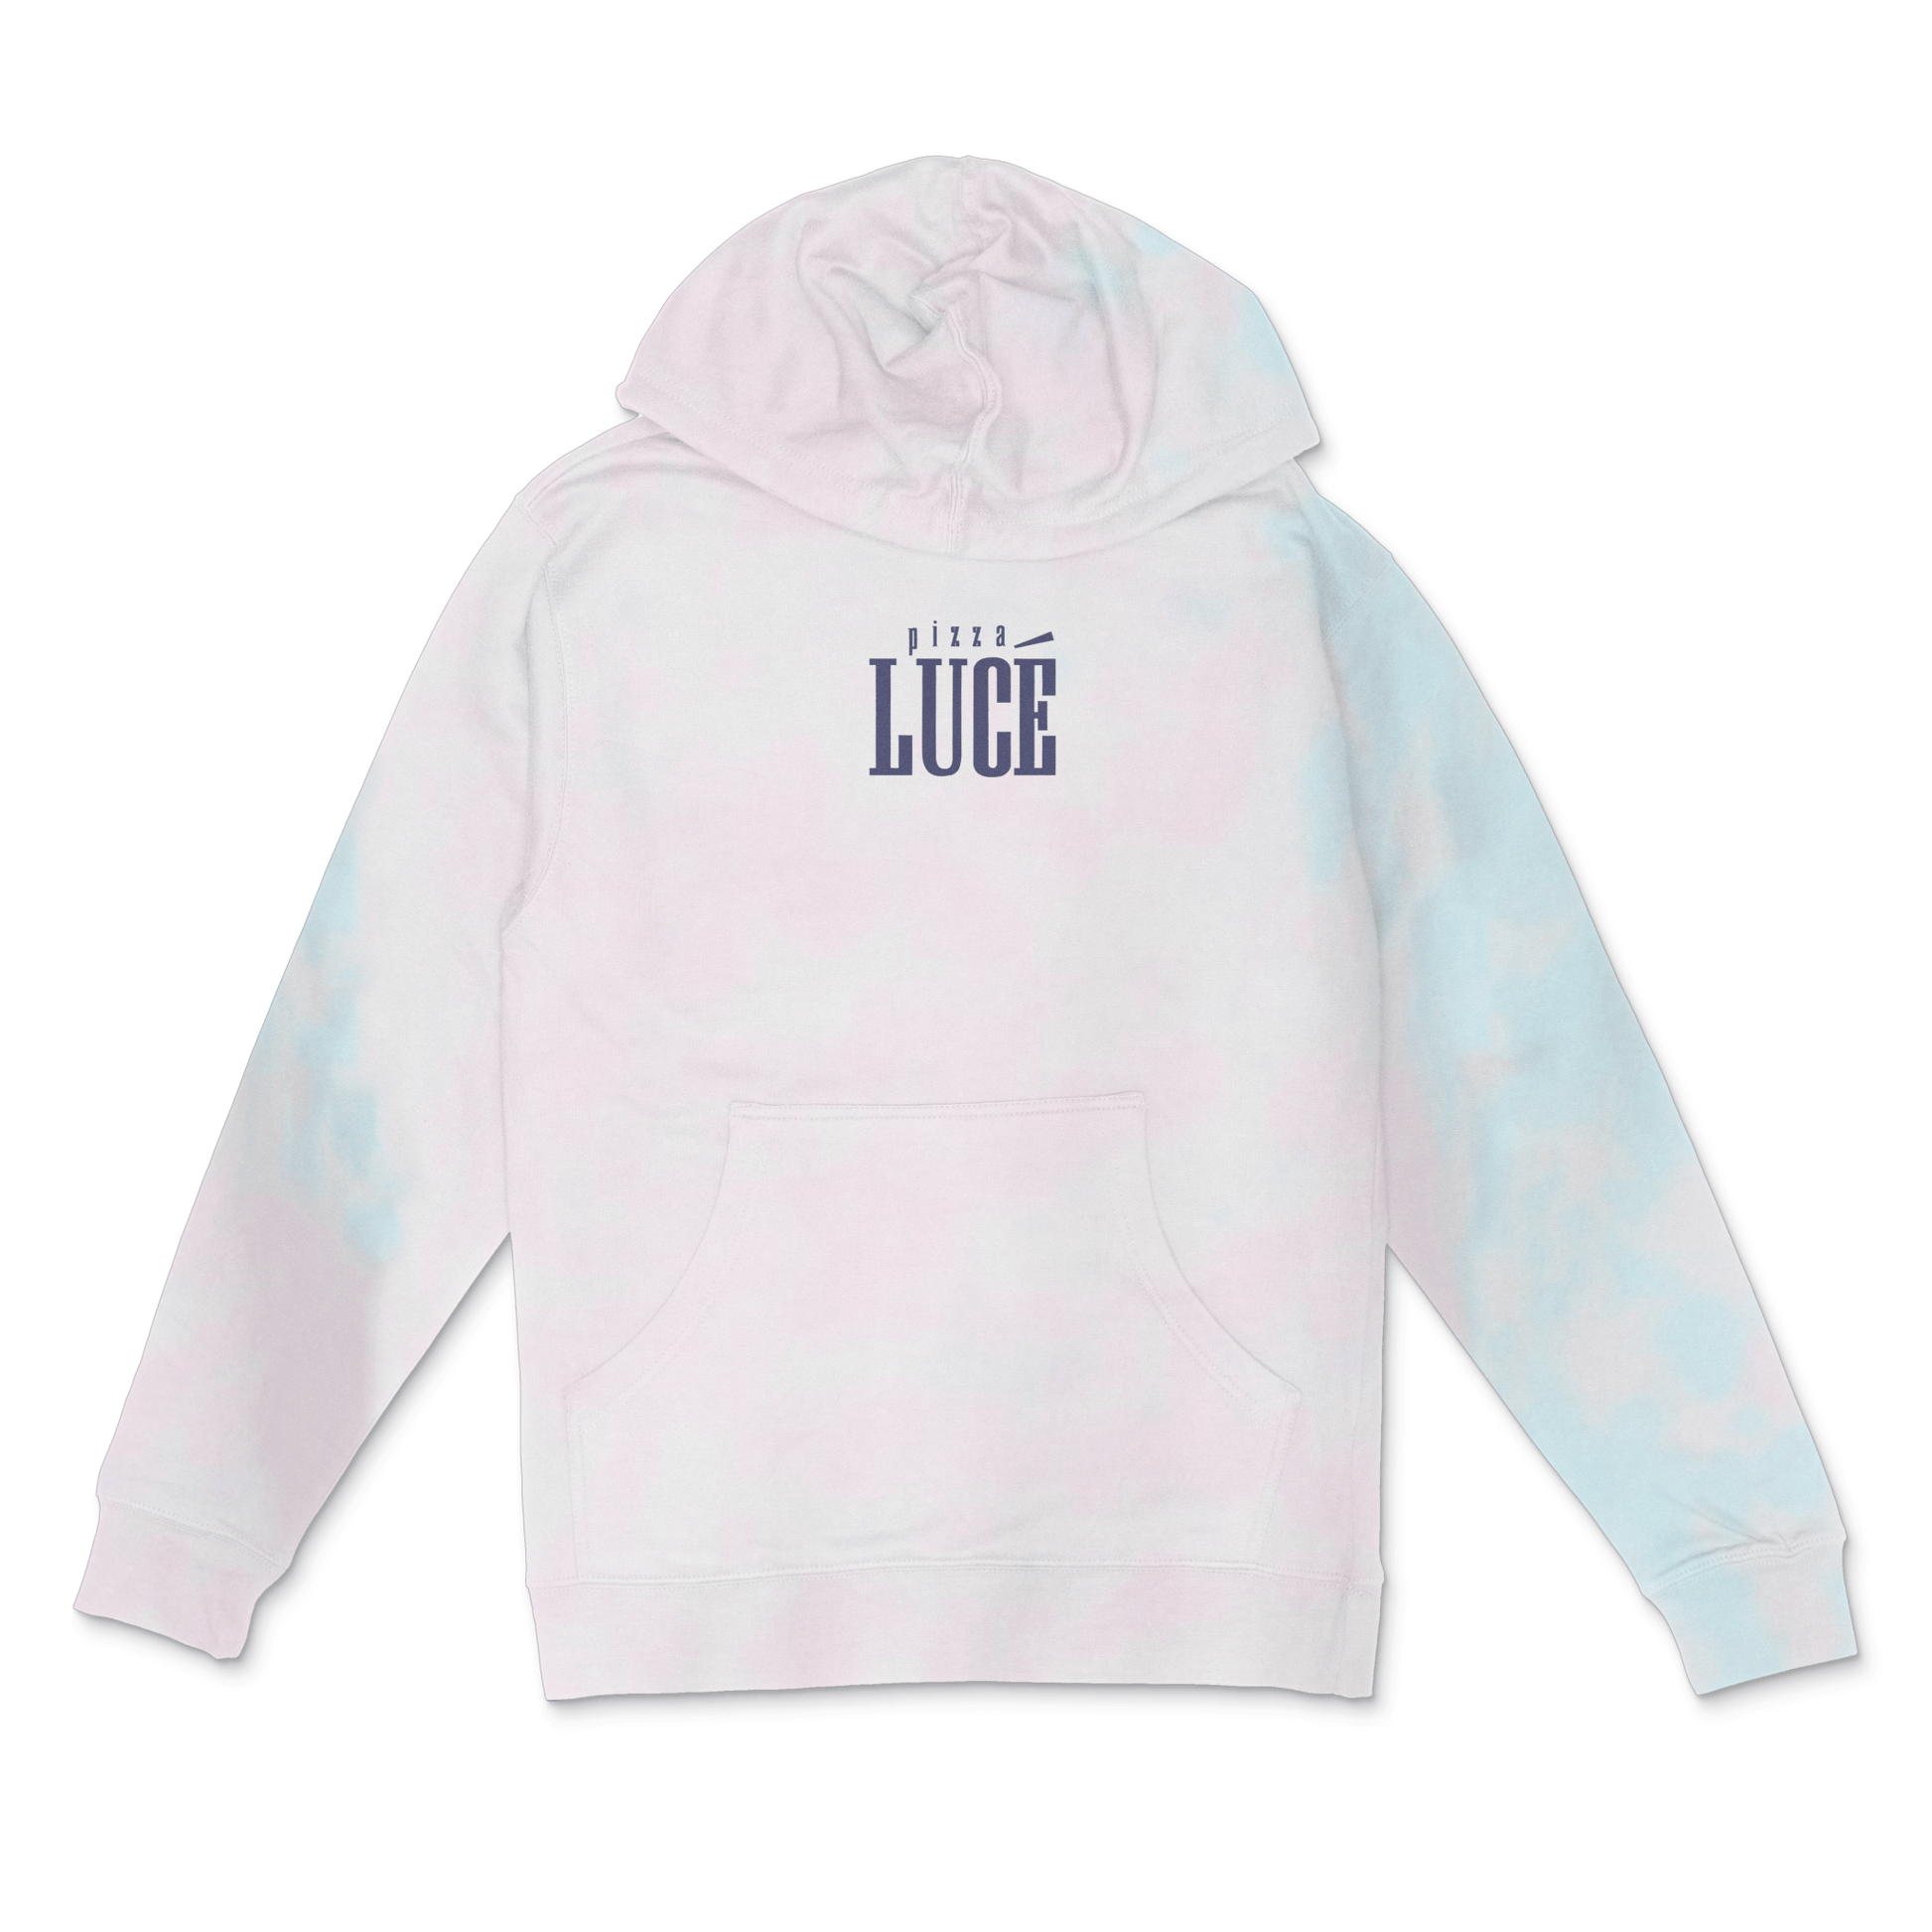 Pizza Luce Unisex Midweight Tie-Dyed Hooded Sweatshirt - DSP On Demand